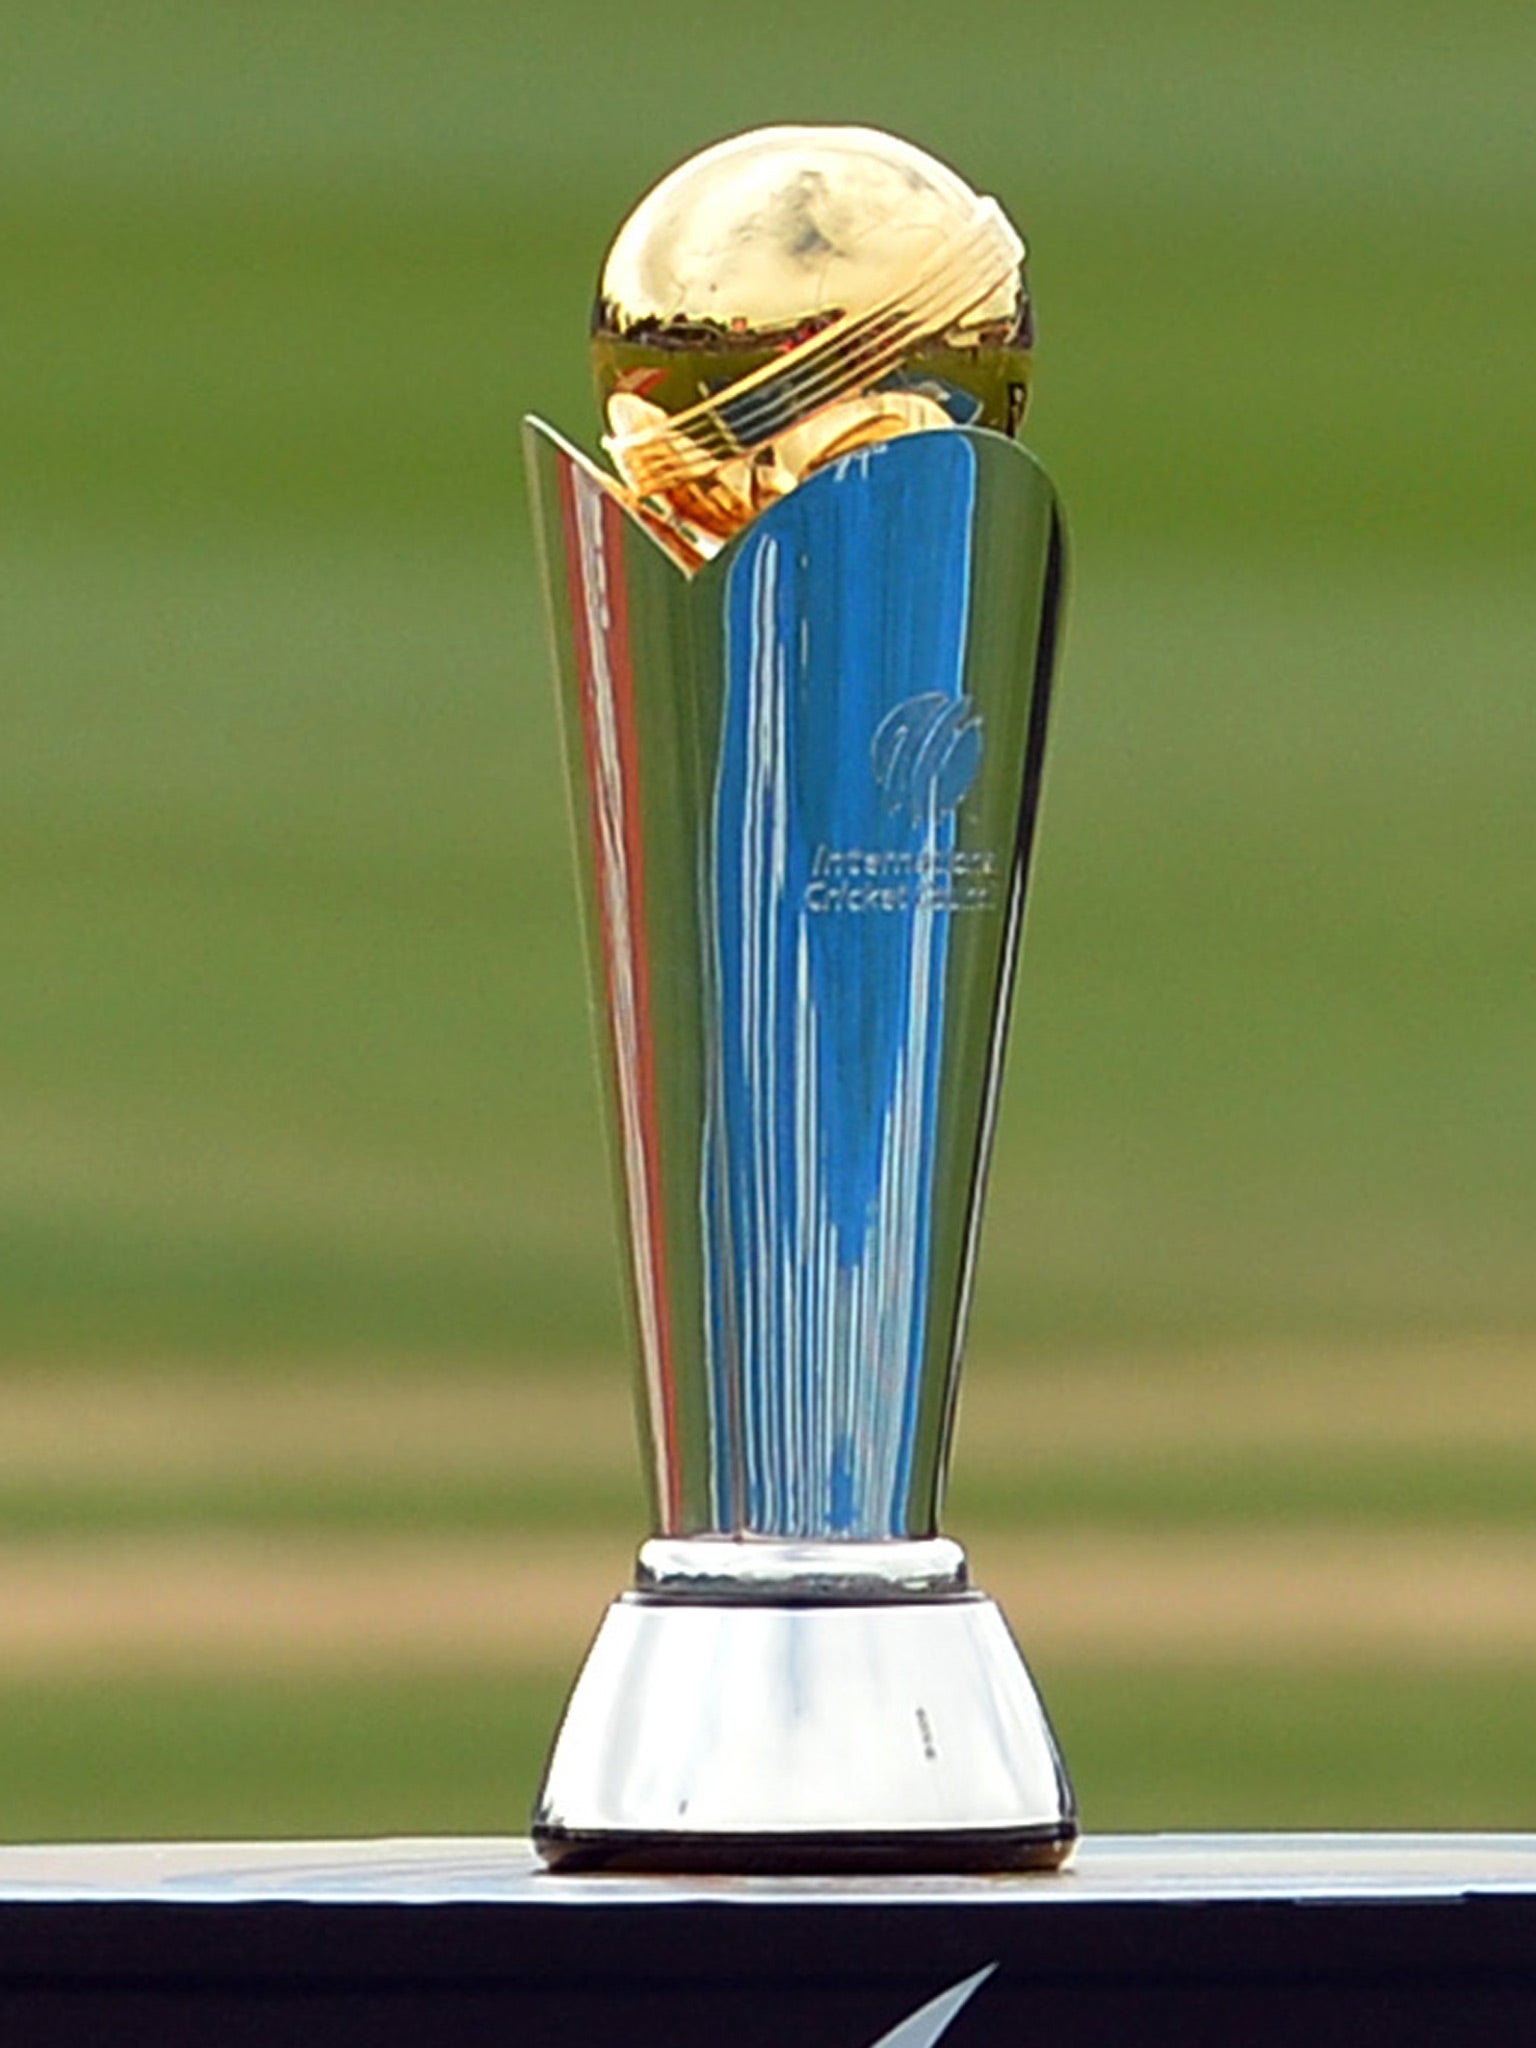 The ICC Champions Trophy